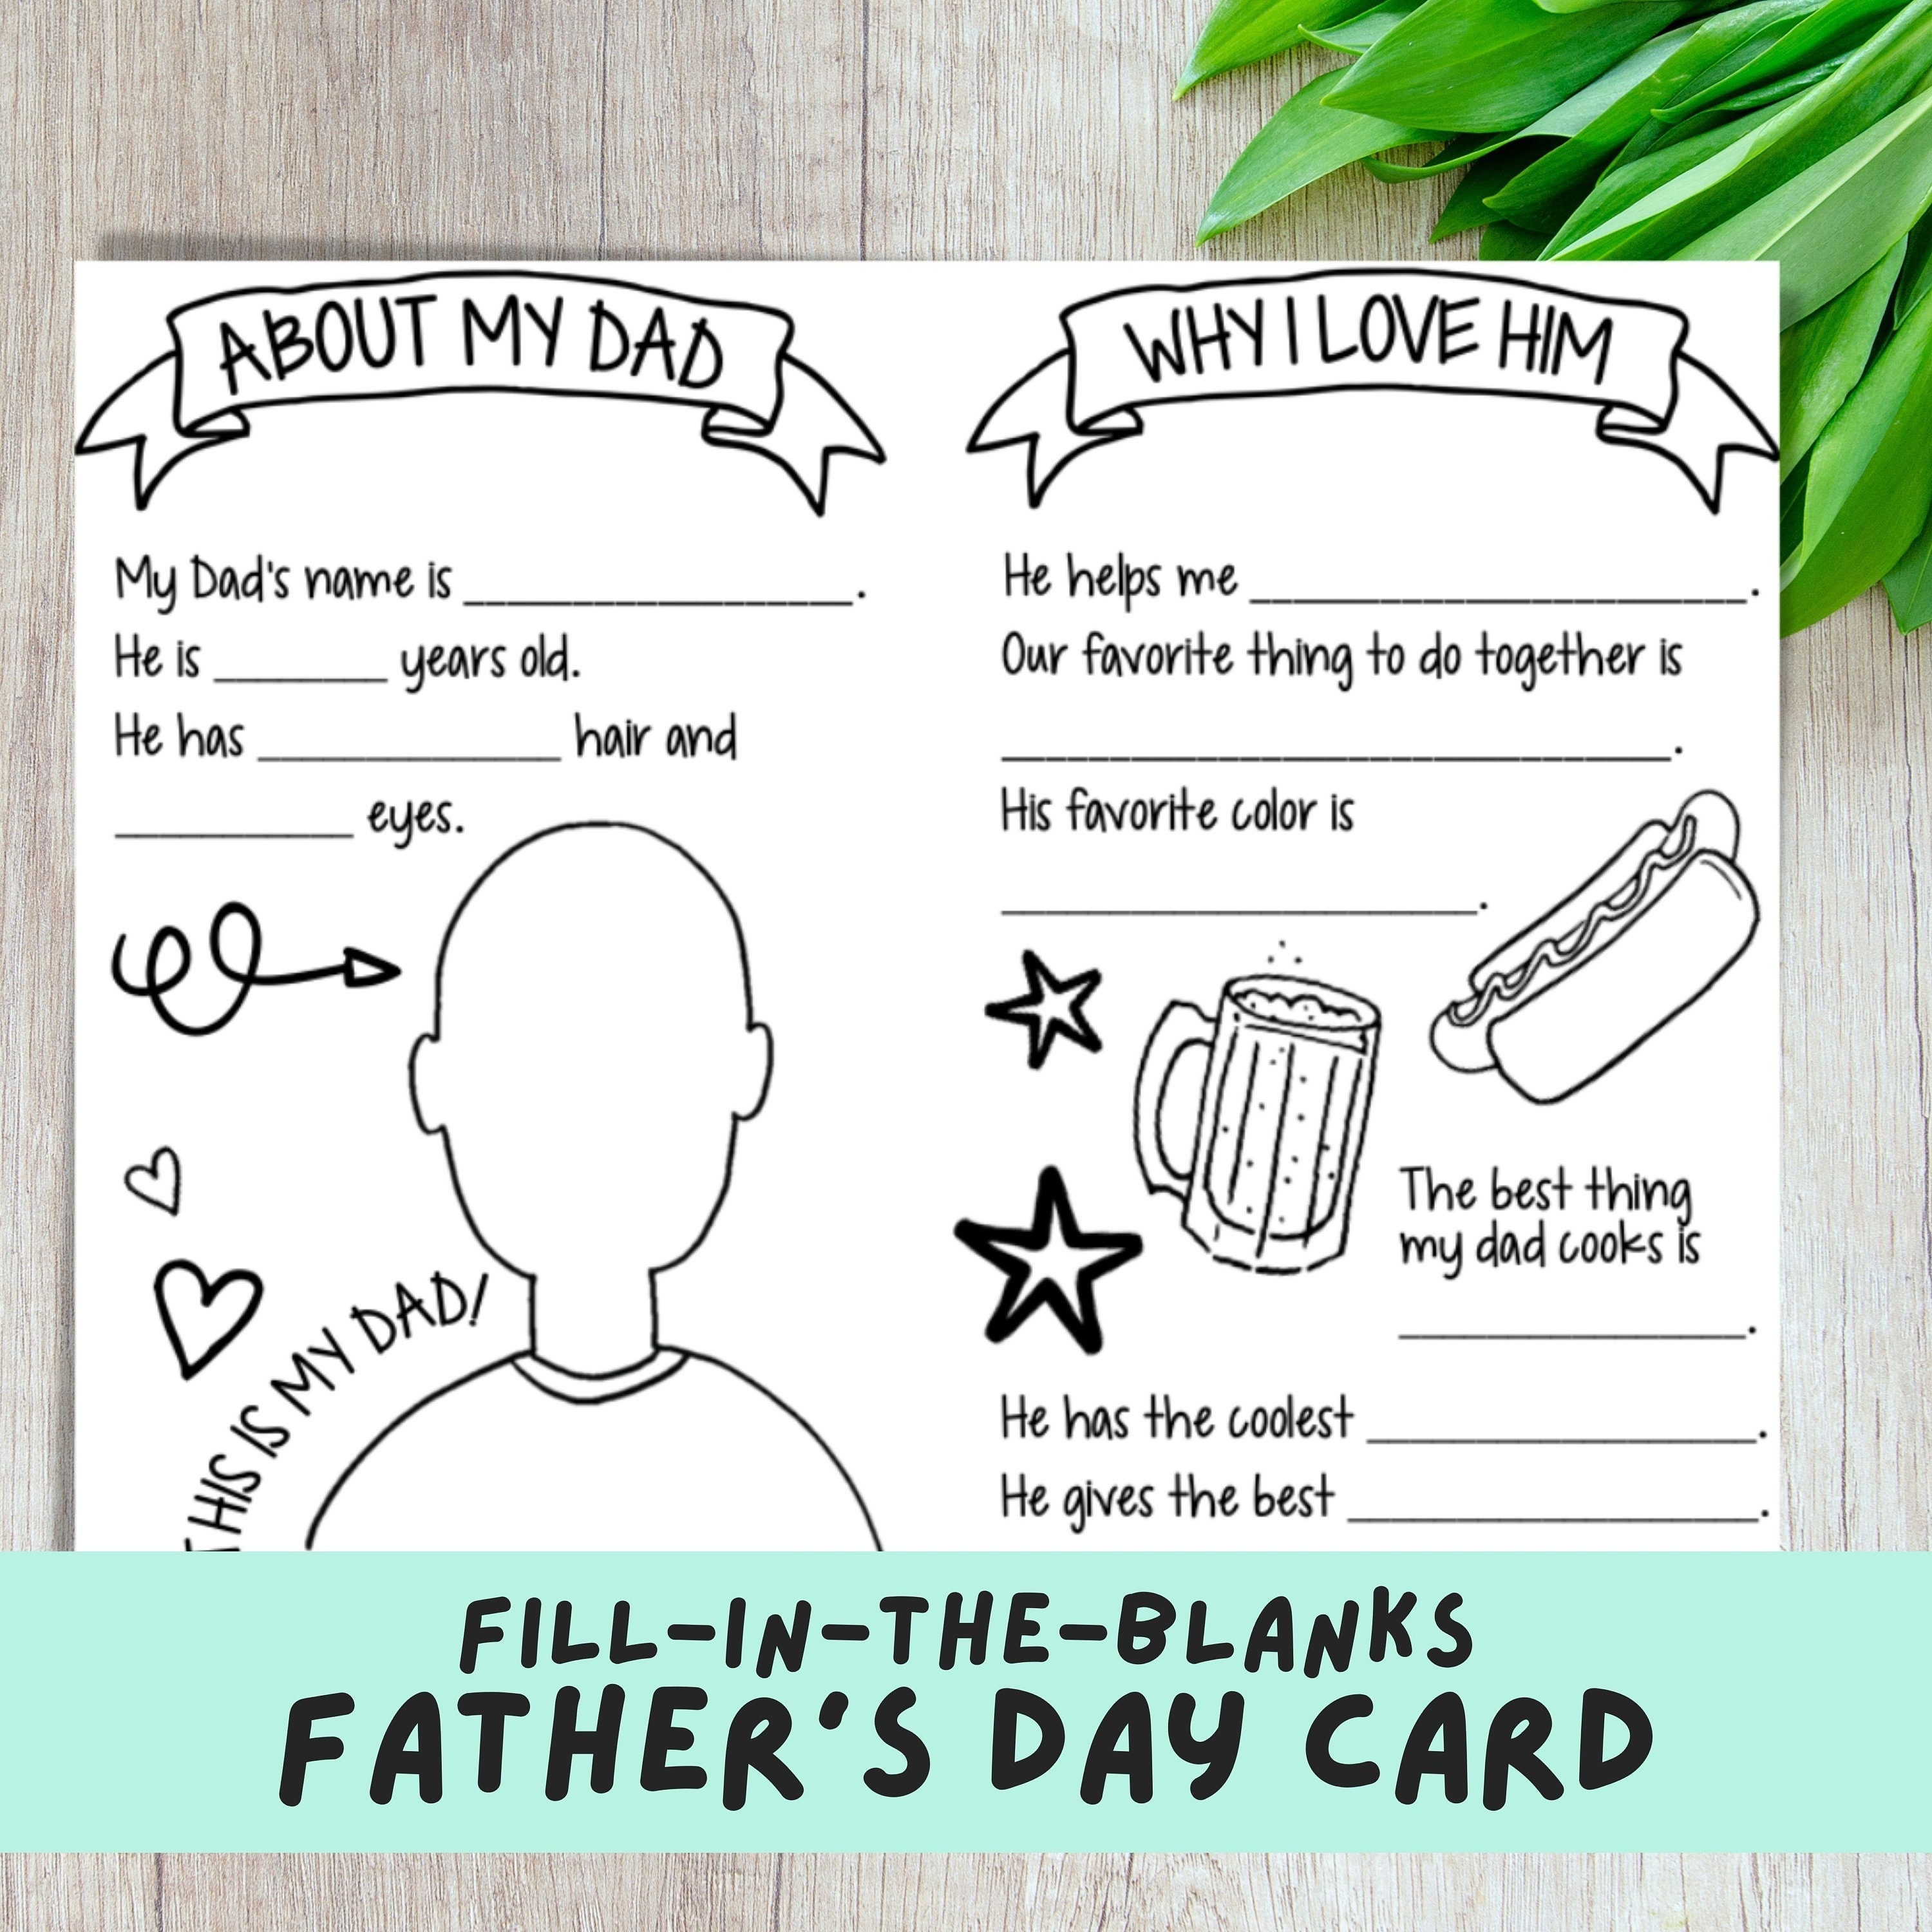 Father's Day Card Fill in the Blanks All About Dad Kids' Activity